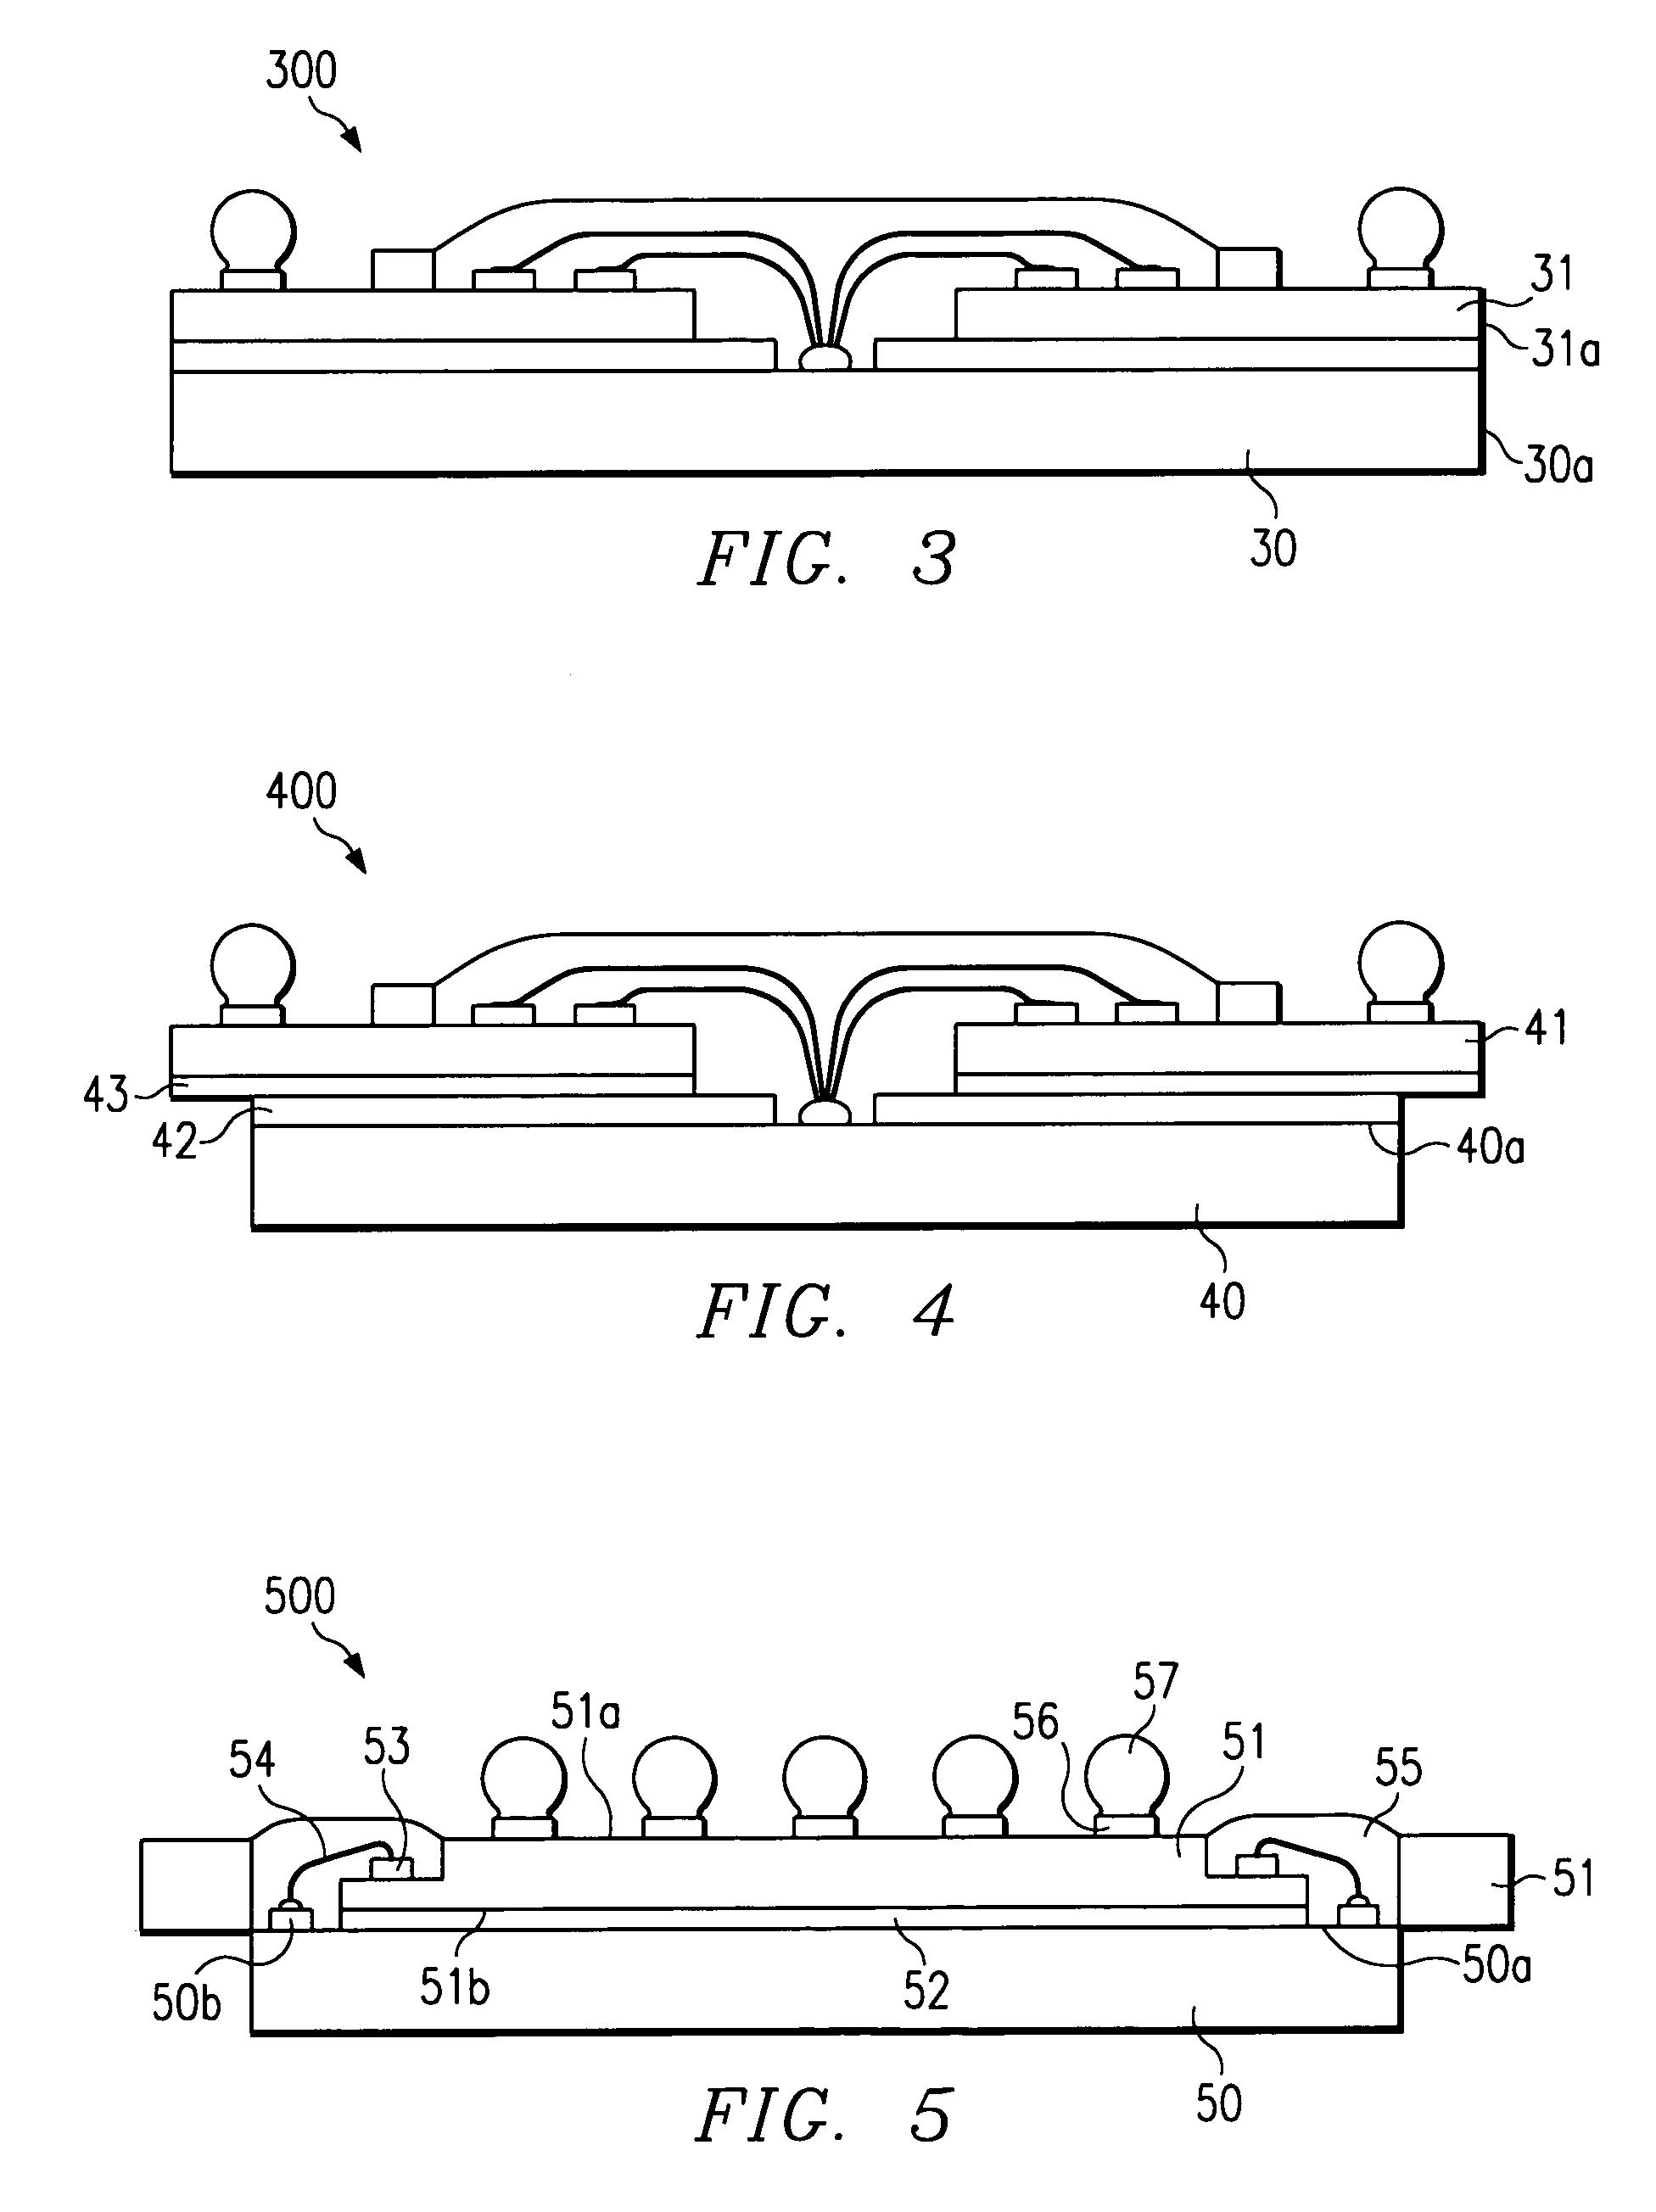 Direct attachment of semiconductor chip to organic substrate